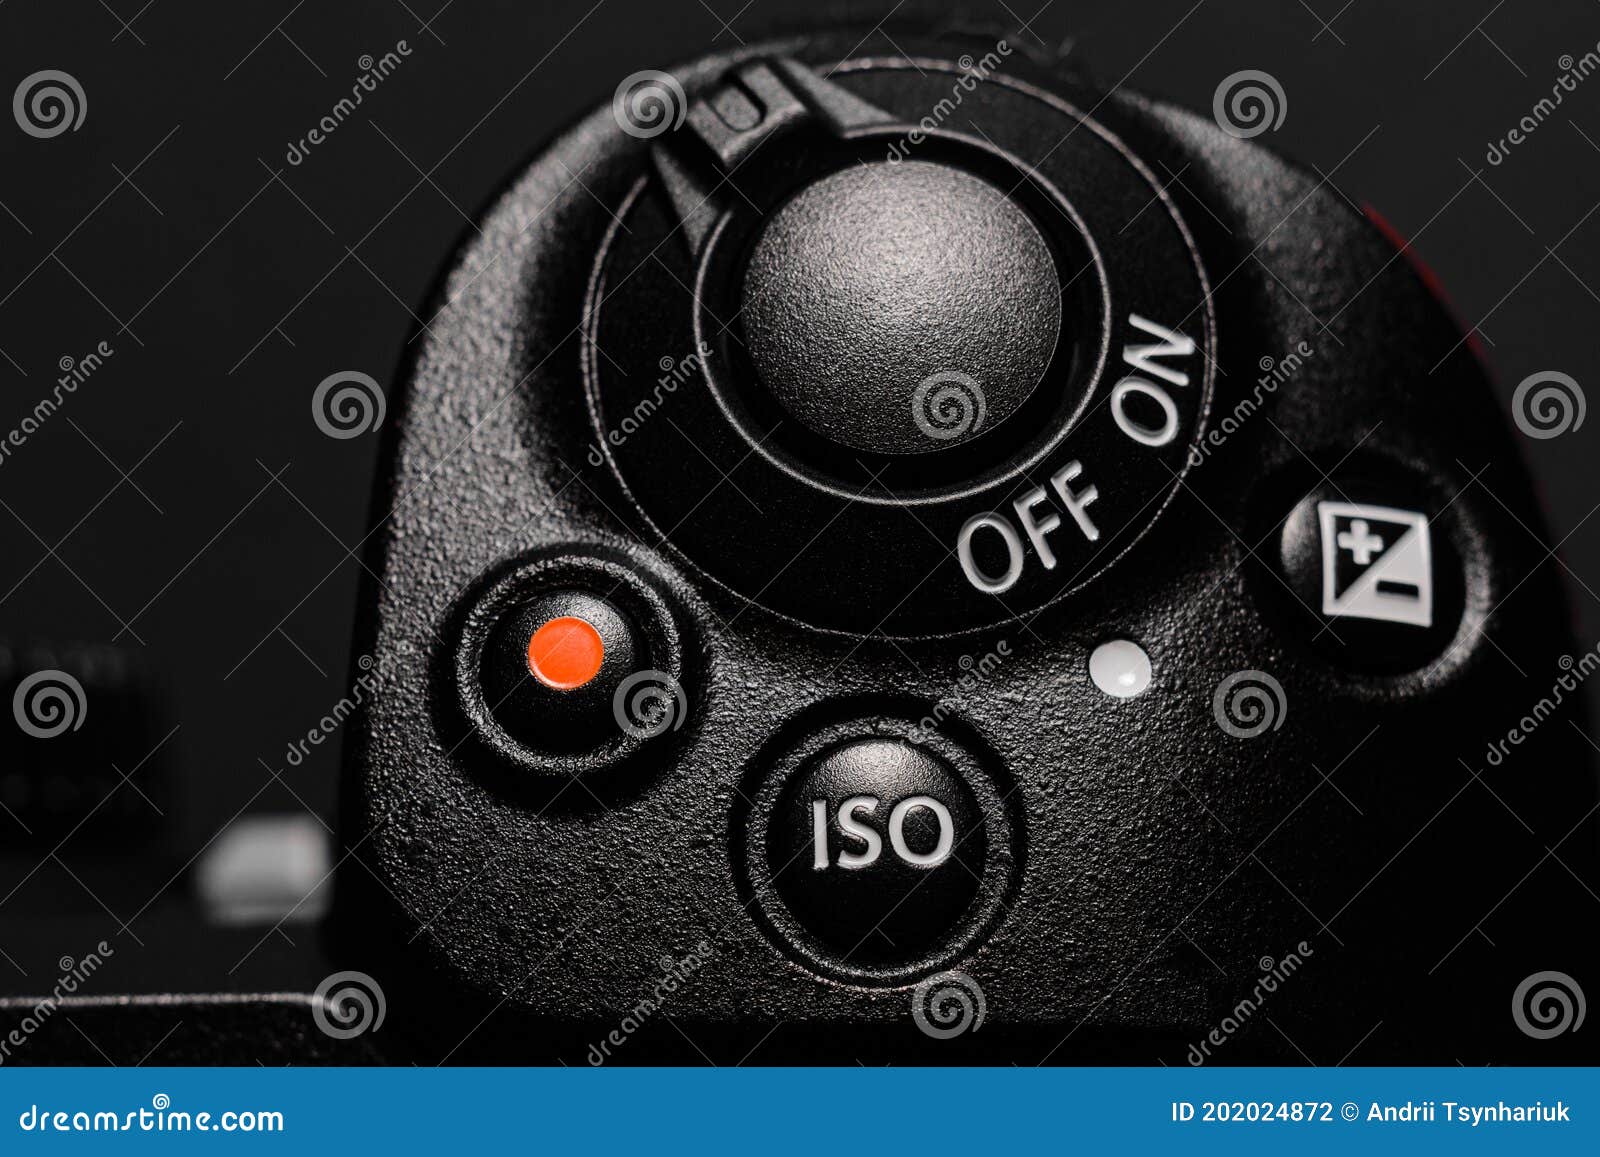 Shutter button and camera power button close up, rear view of the camera 2021